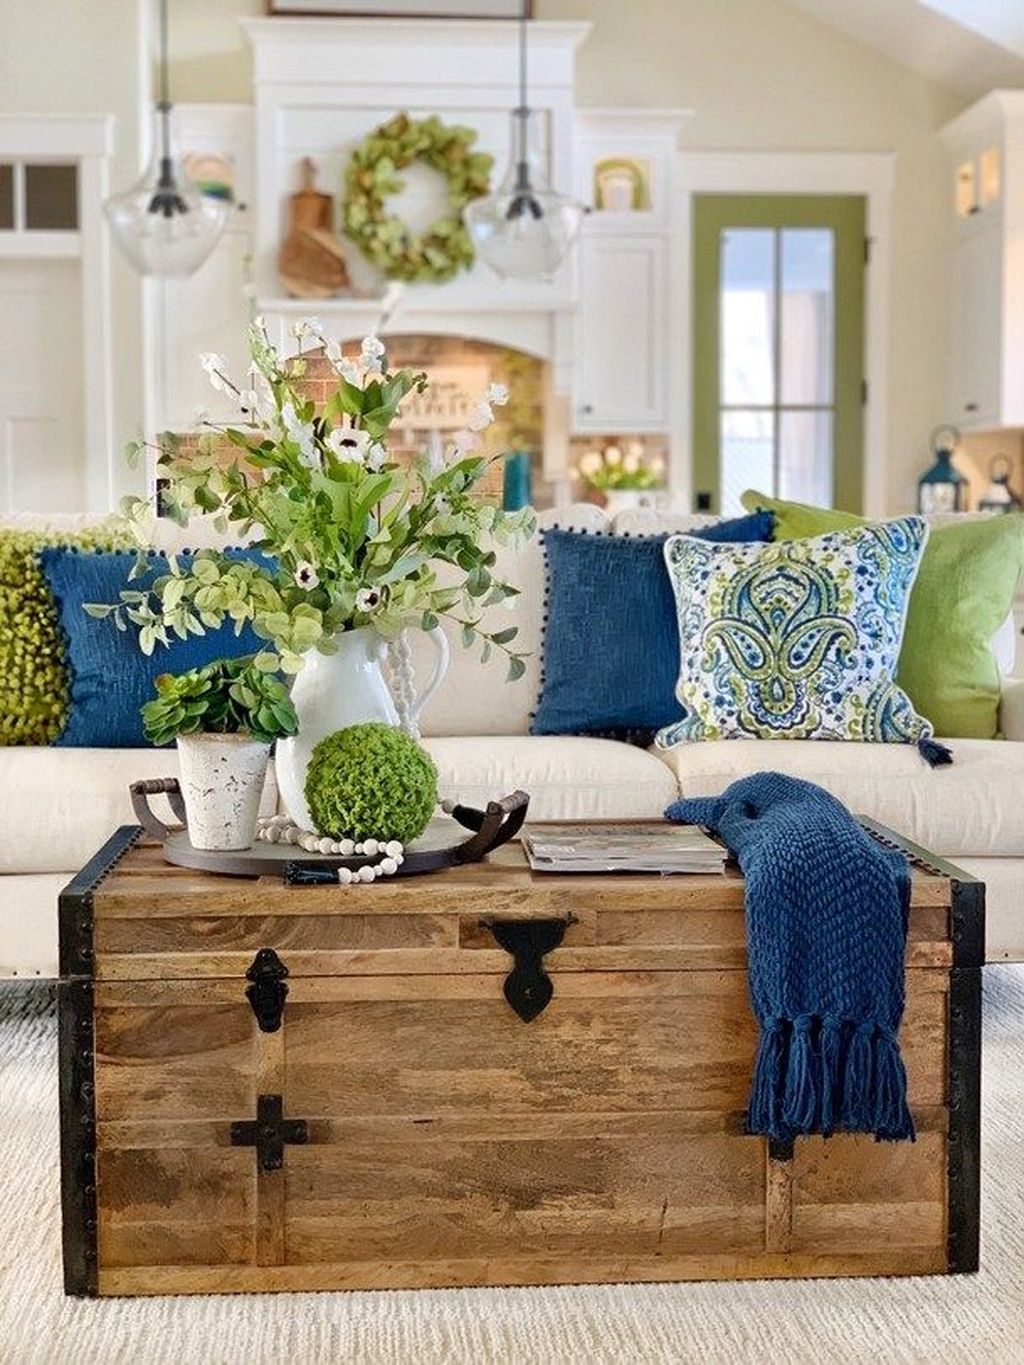 Superb Living Room Decor Ideas For Spring To Try Soon 42